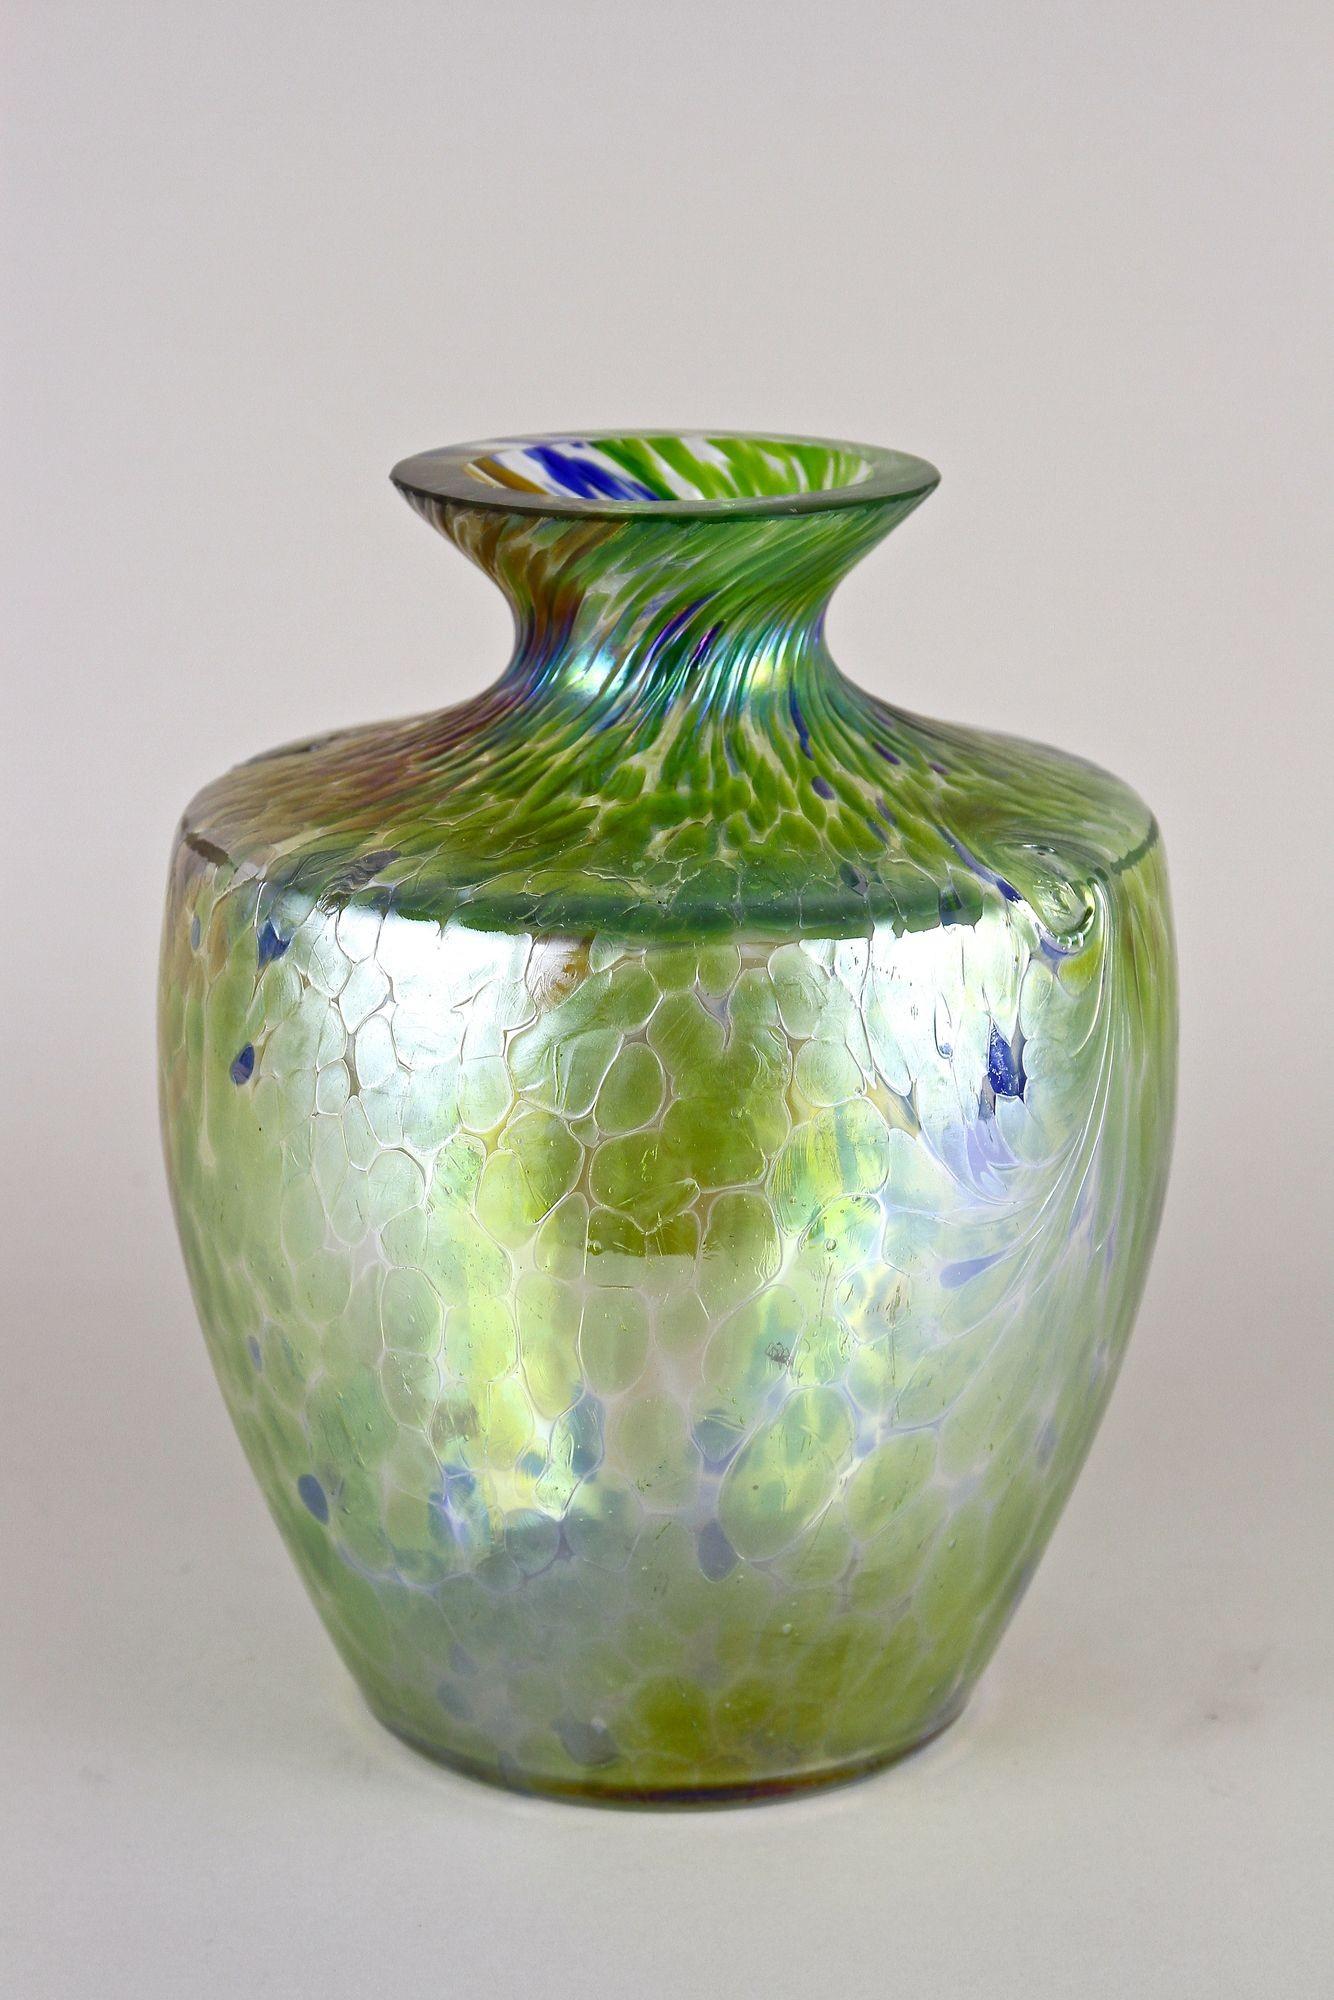 Czech Iridescent Art Nouveau Glass Vase Attributed To Fritz Heckert, Bohemia ca. 1905 For Sale